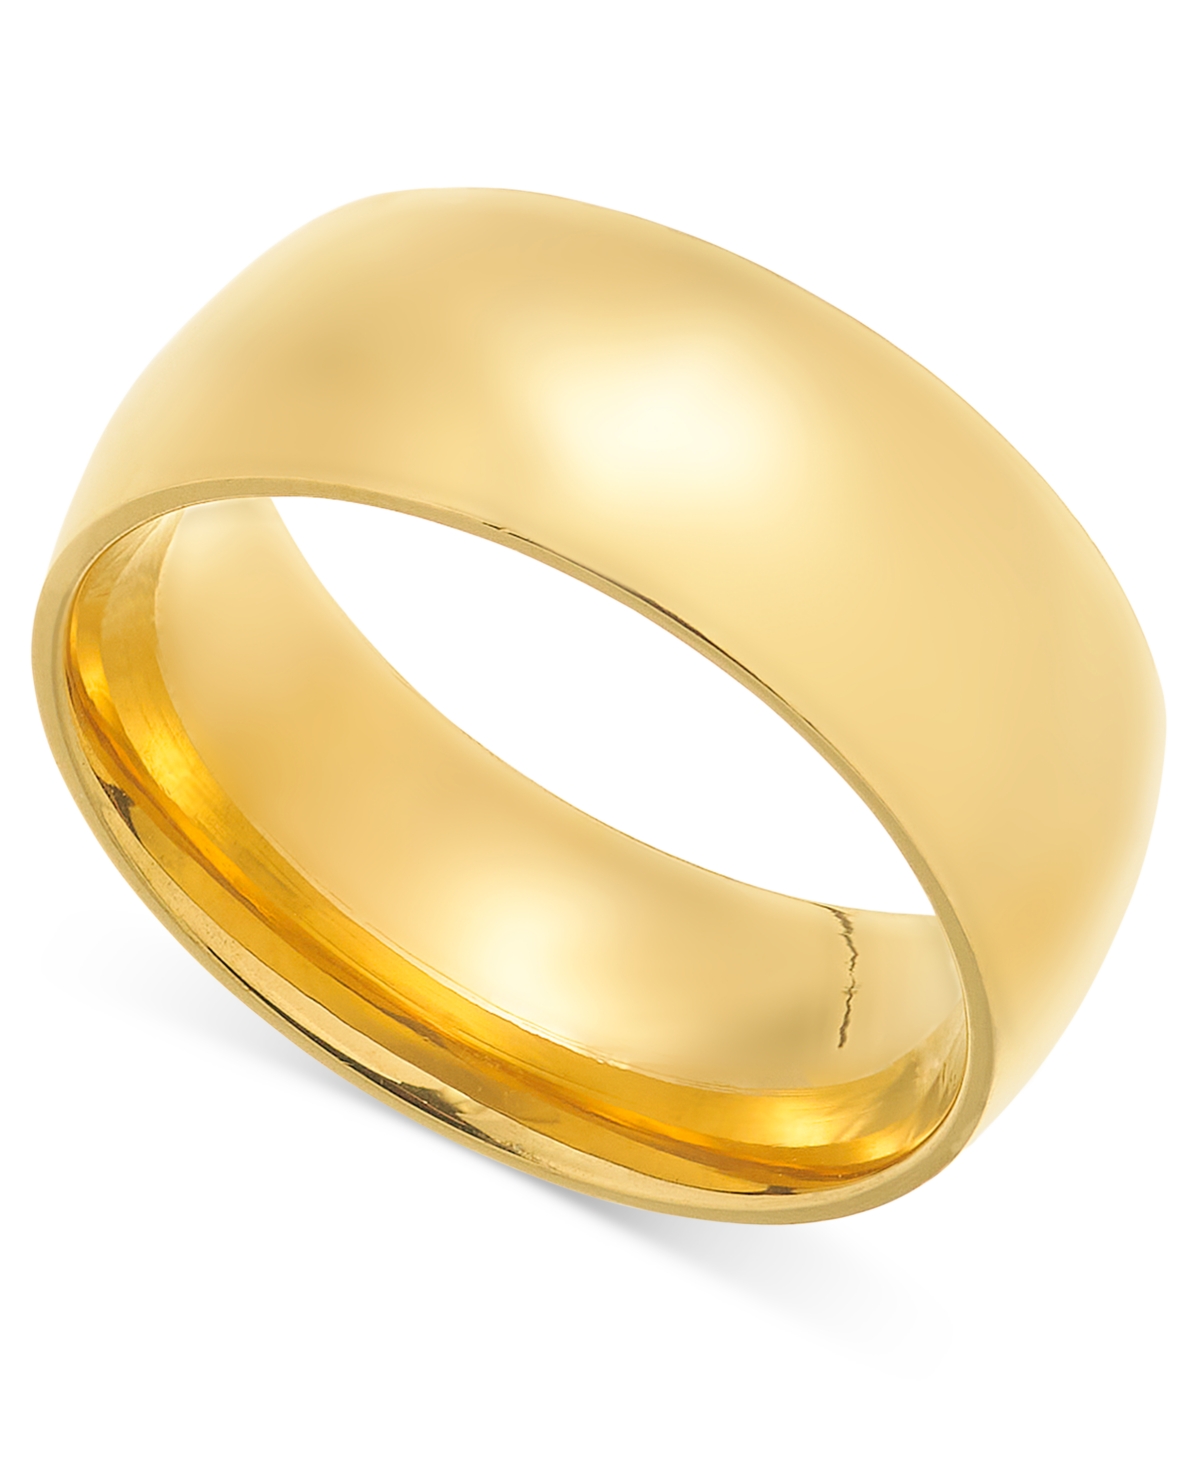 Lola Ade 18k Gold-plated Stainless Steel Cigar Band Yuri Ring